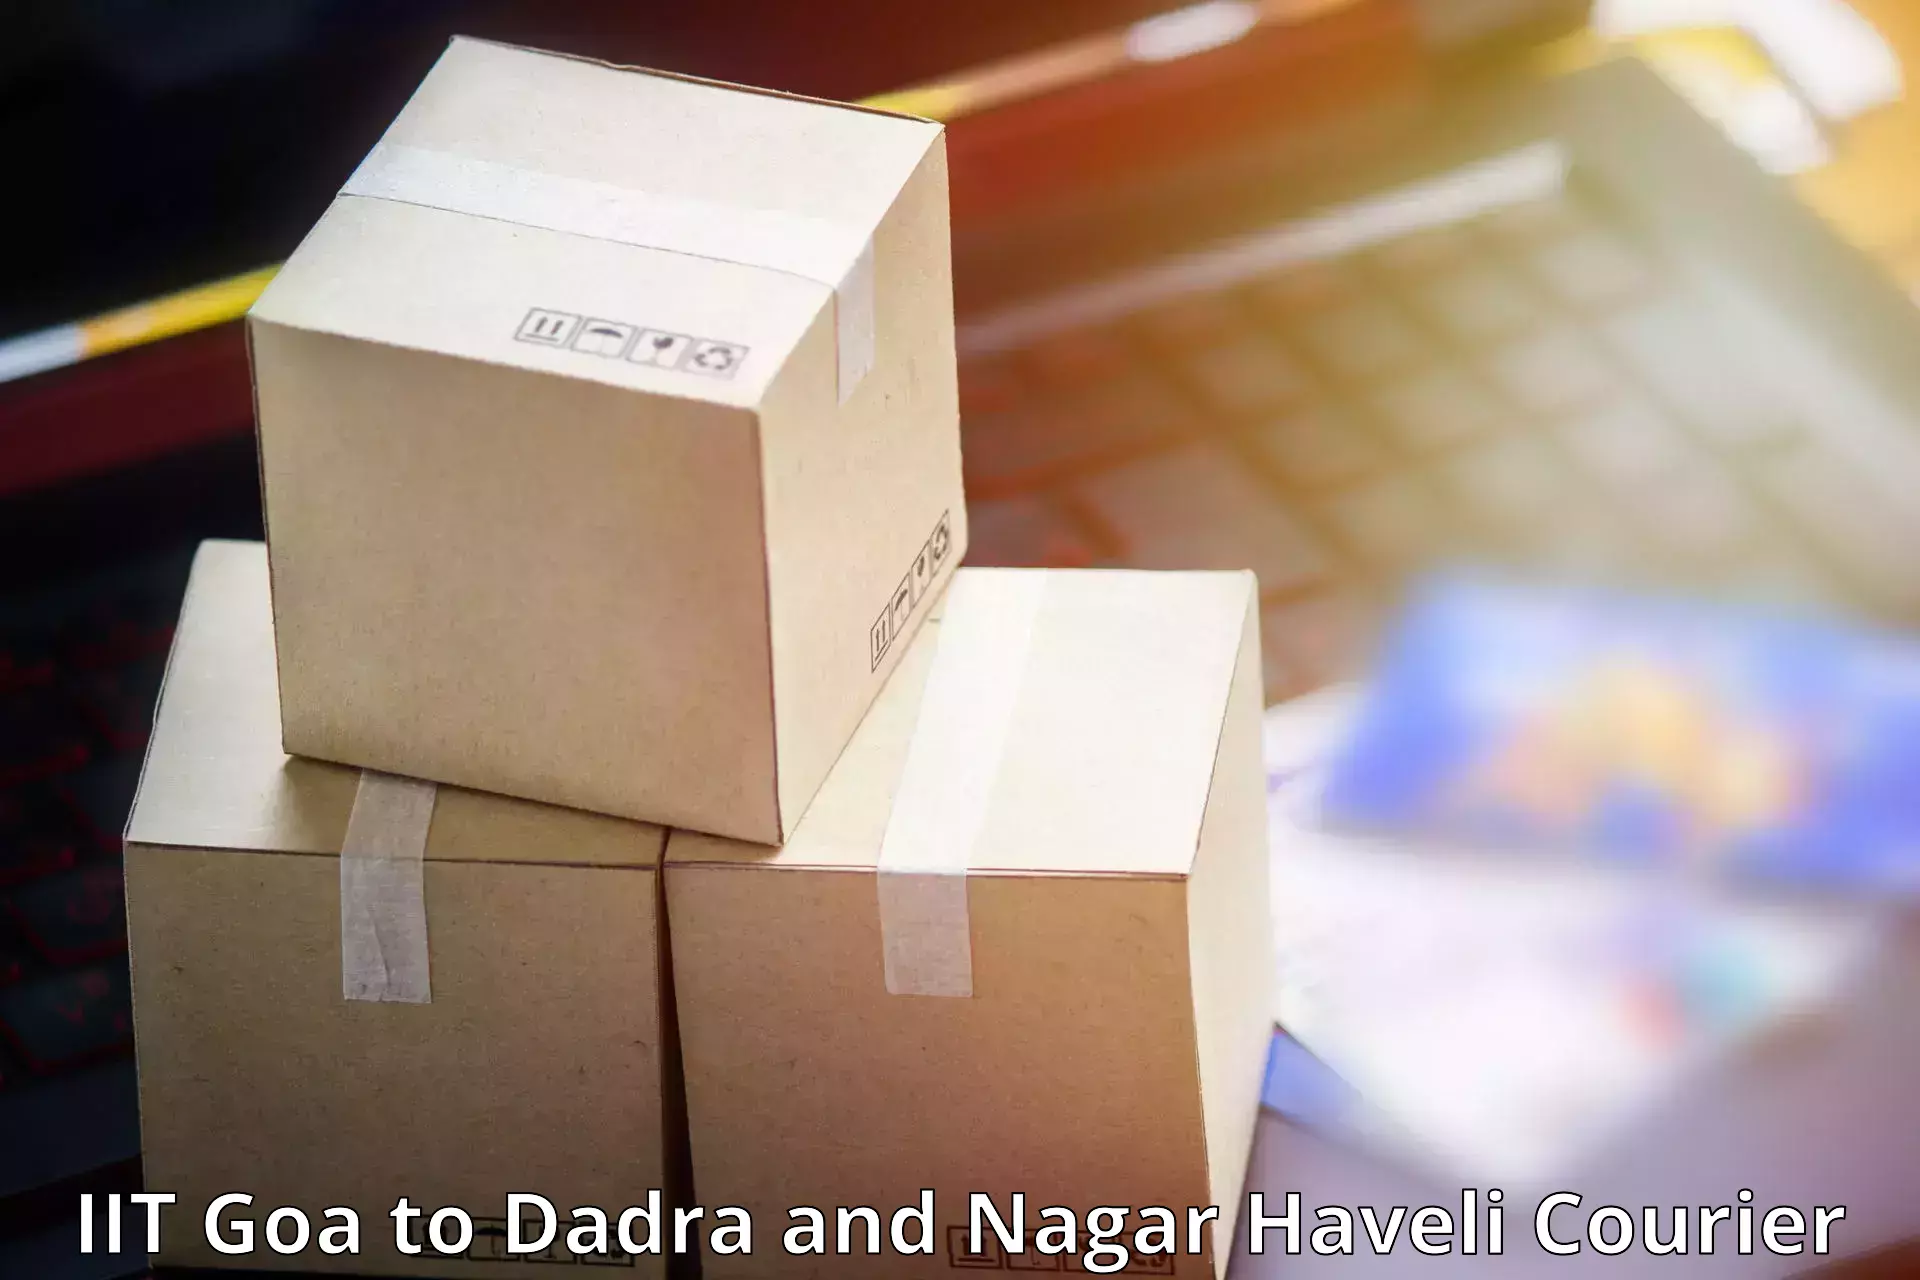 Multi-national courier services IIT Goa to Dadra and Nagar Haveli